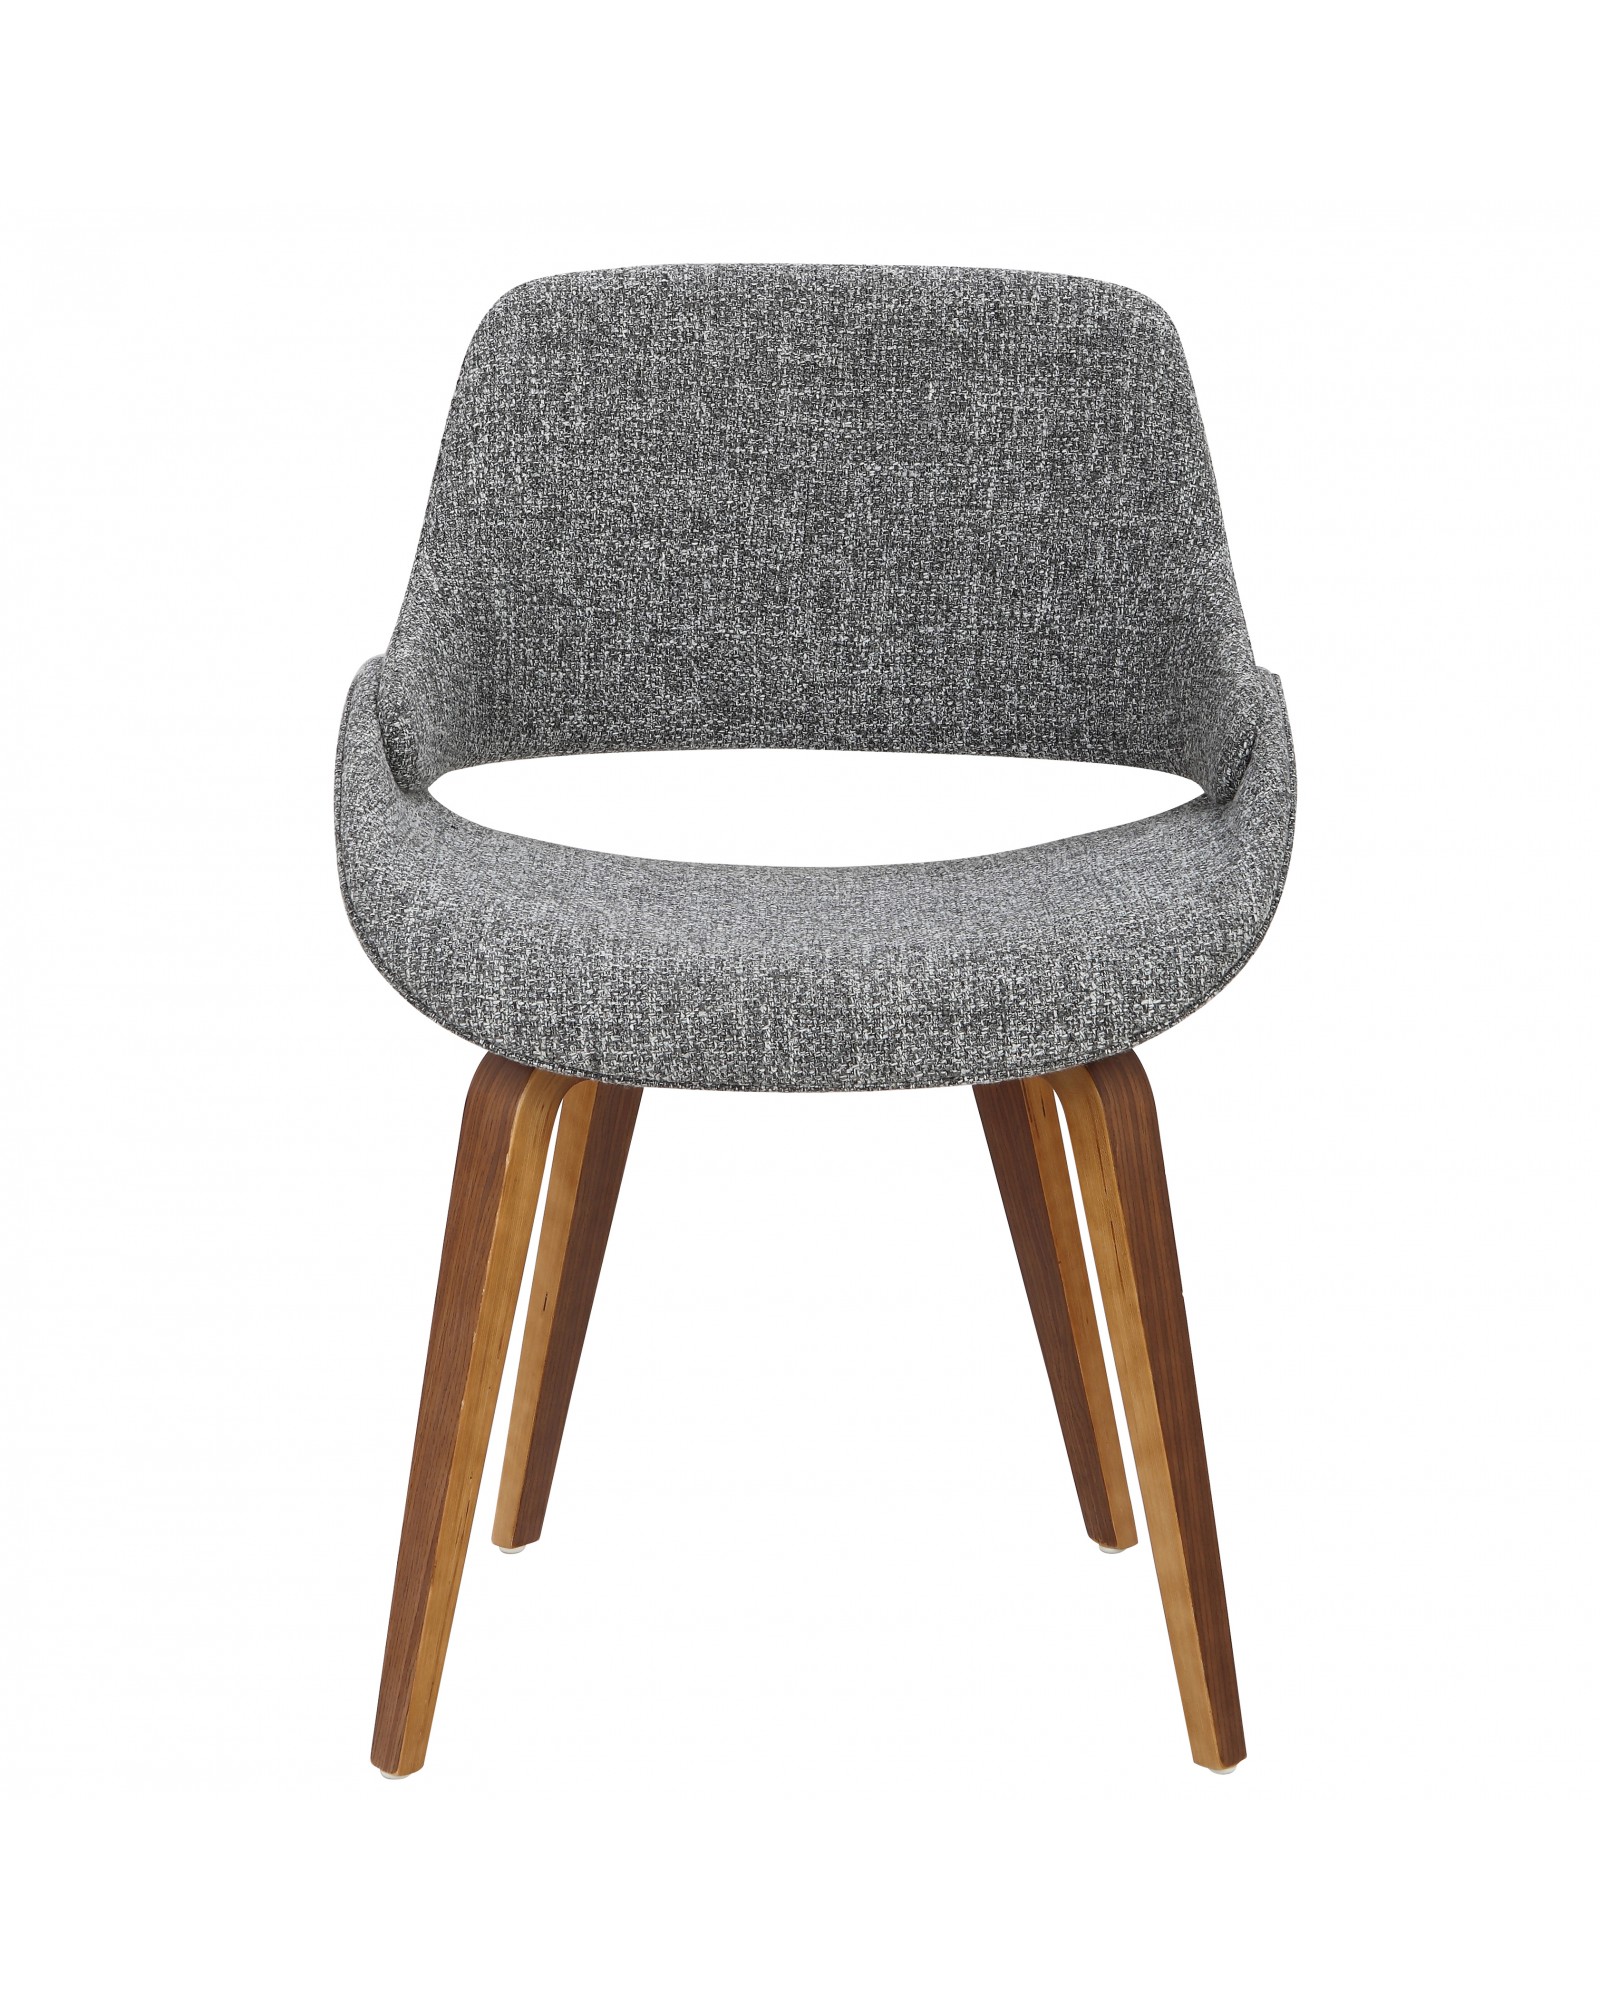 Fabrico Mid-Century Modern Dining/Accent Chair in Walnut and Grey Noise Fabric - Set of 2